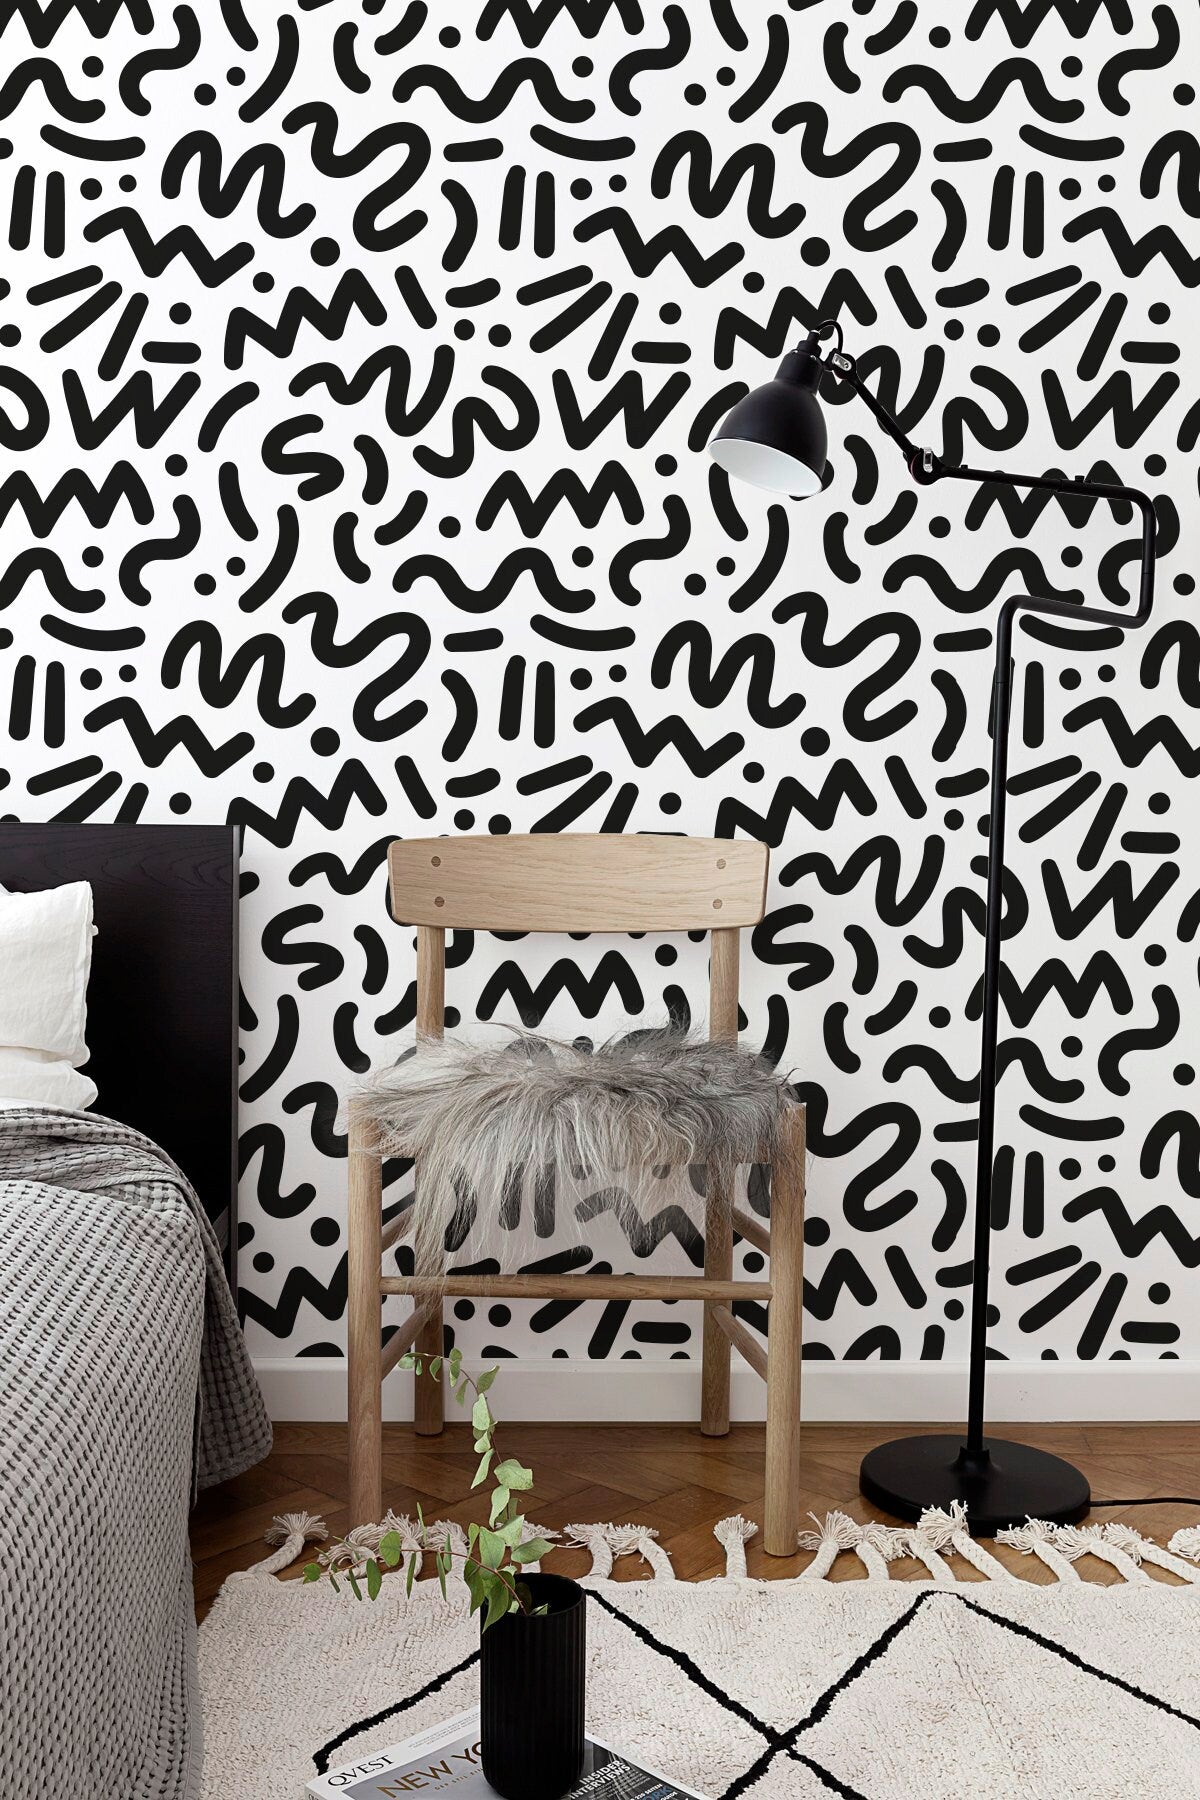 Removable Wallpaper Scandinavian Wallpaper Temporary Wallpaper Minimalistic Wallpaper Peel and Stick Black and White Wall Paper - AS1-B493